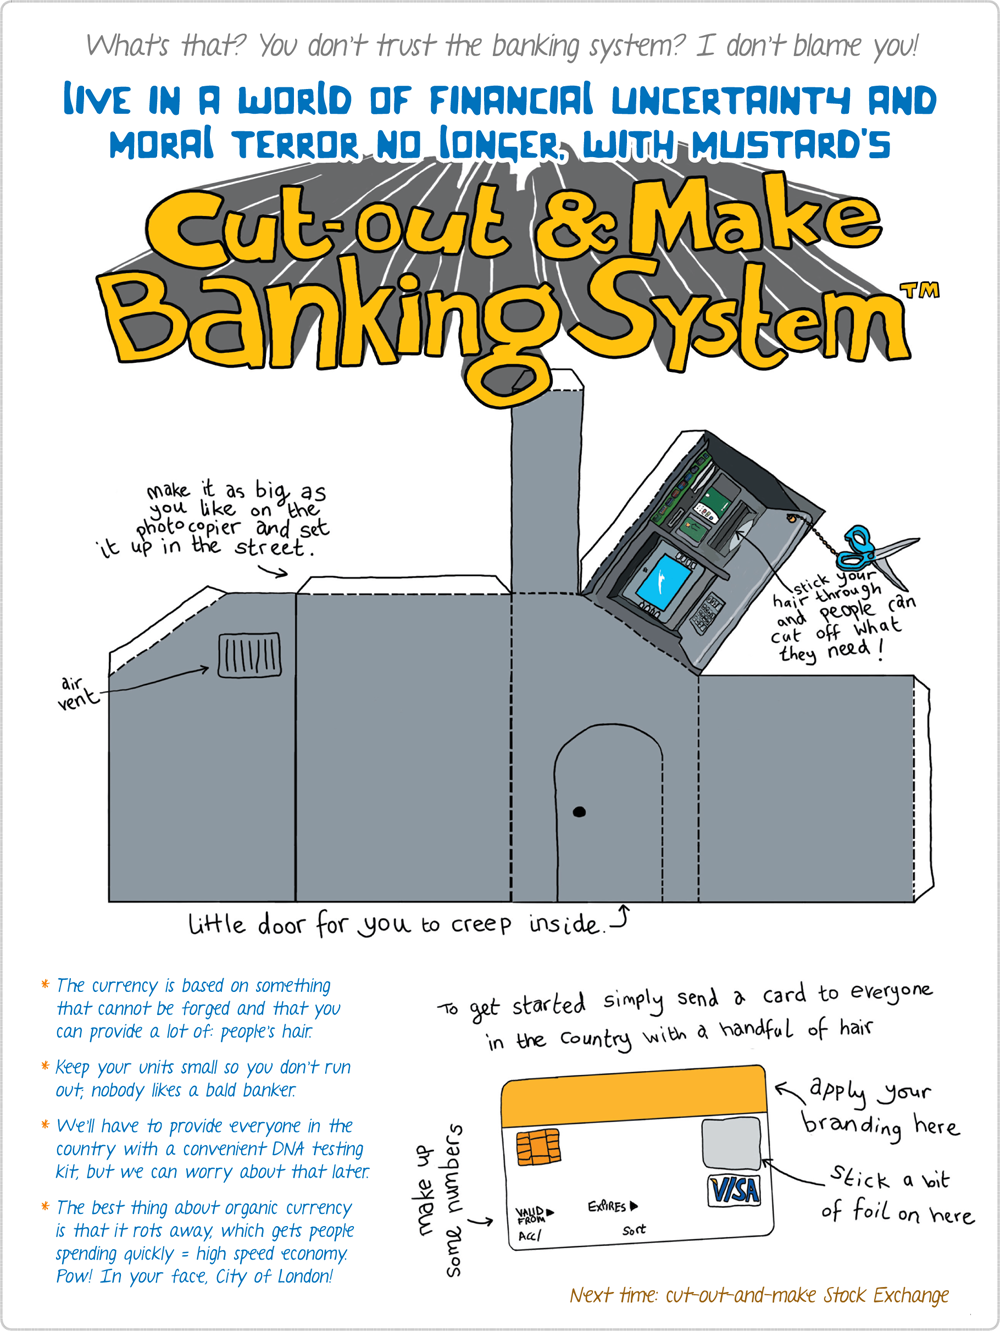 Cut Out and Make Banking System